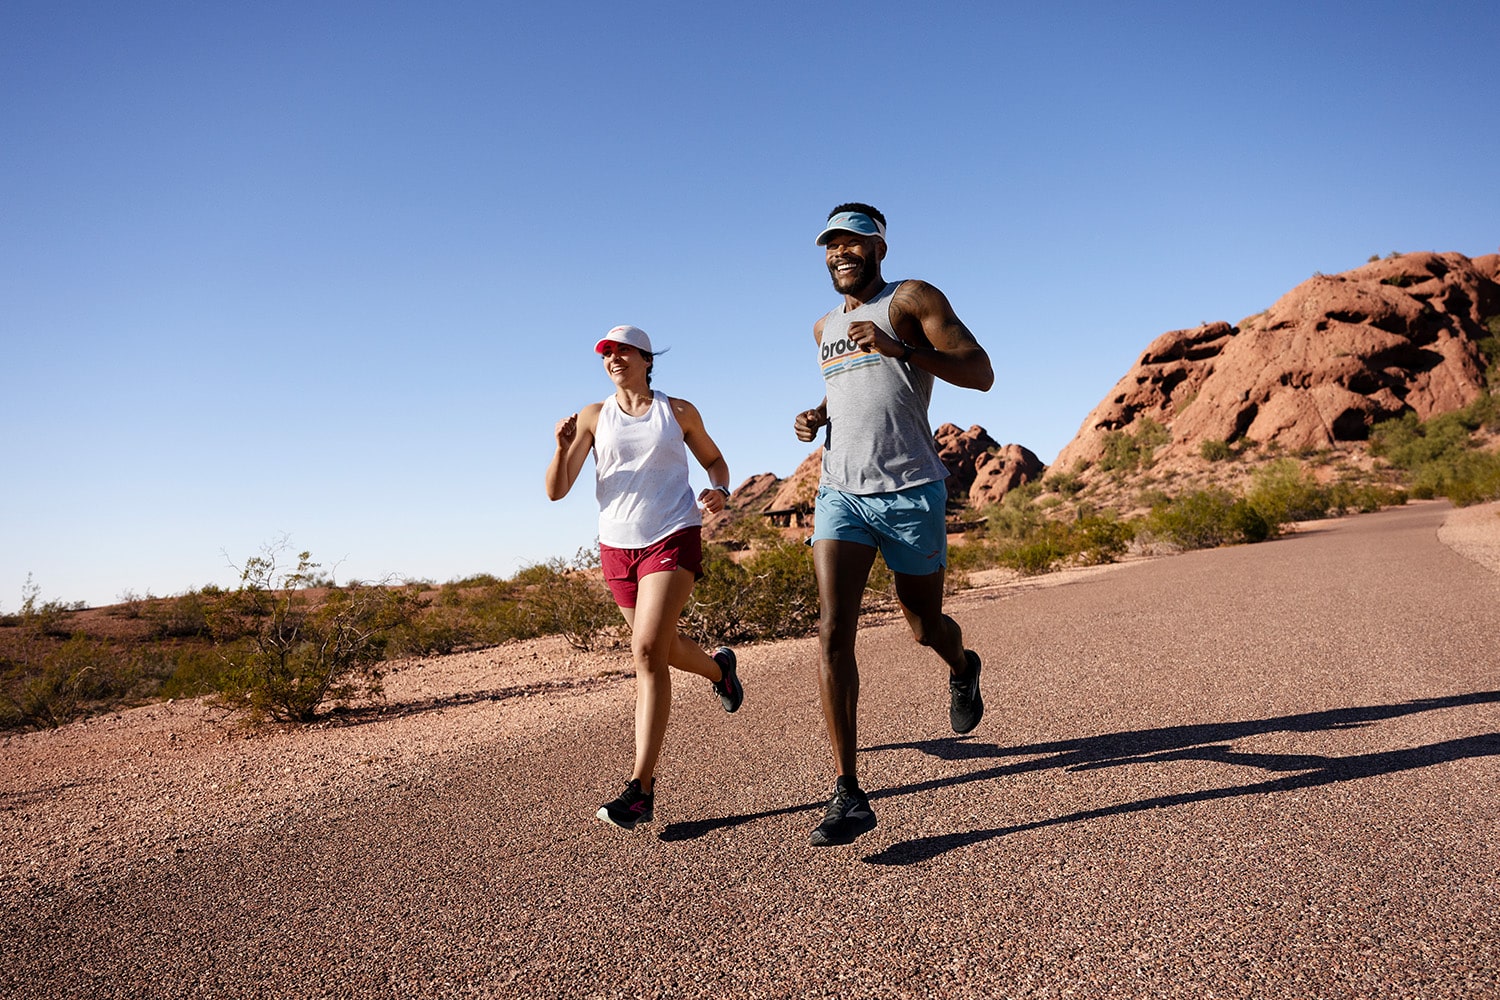 Two runners, wearing Brooks Running apparel and footwear, jogging on a road in the desert.